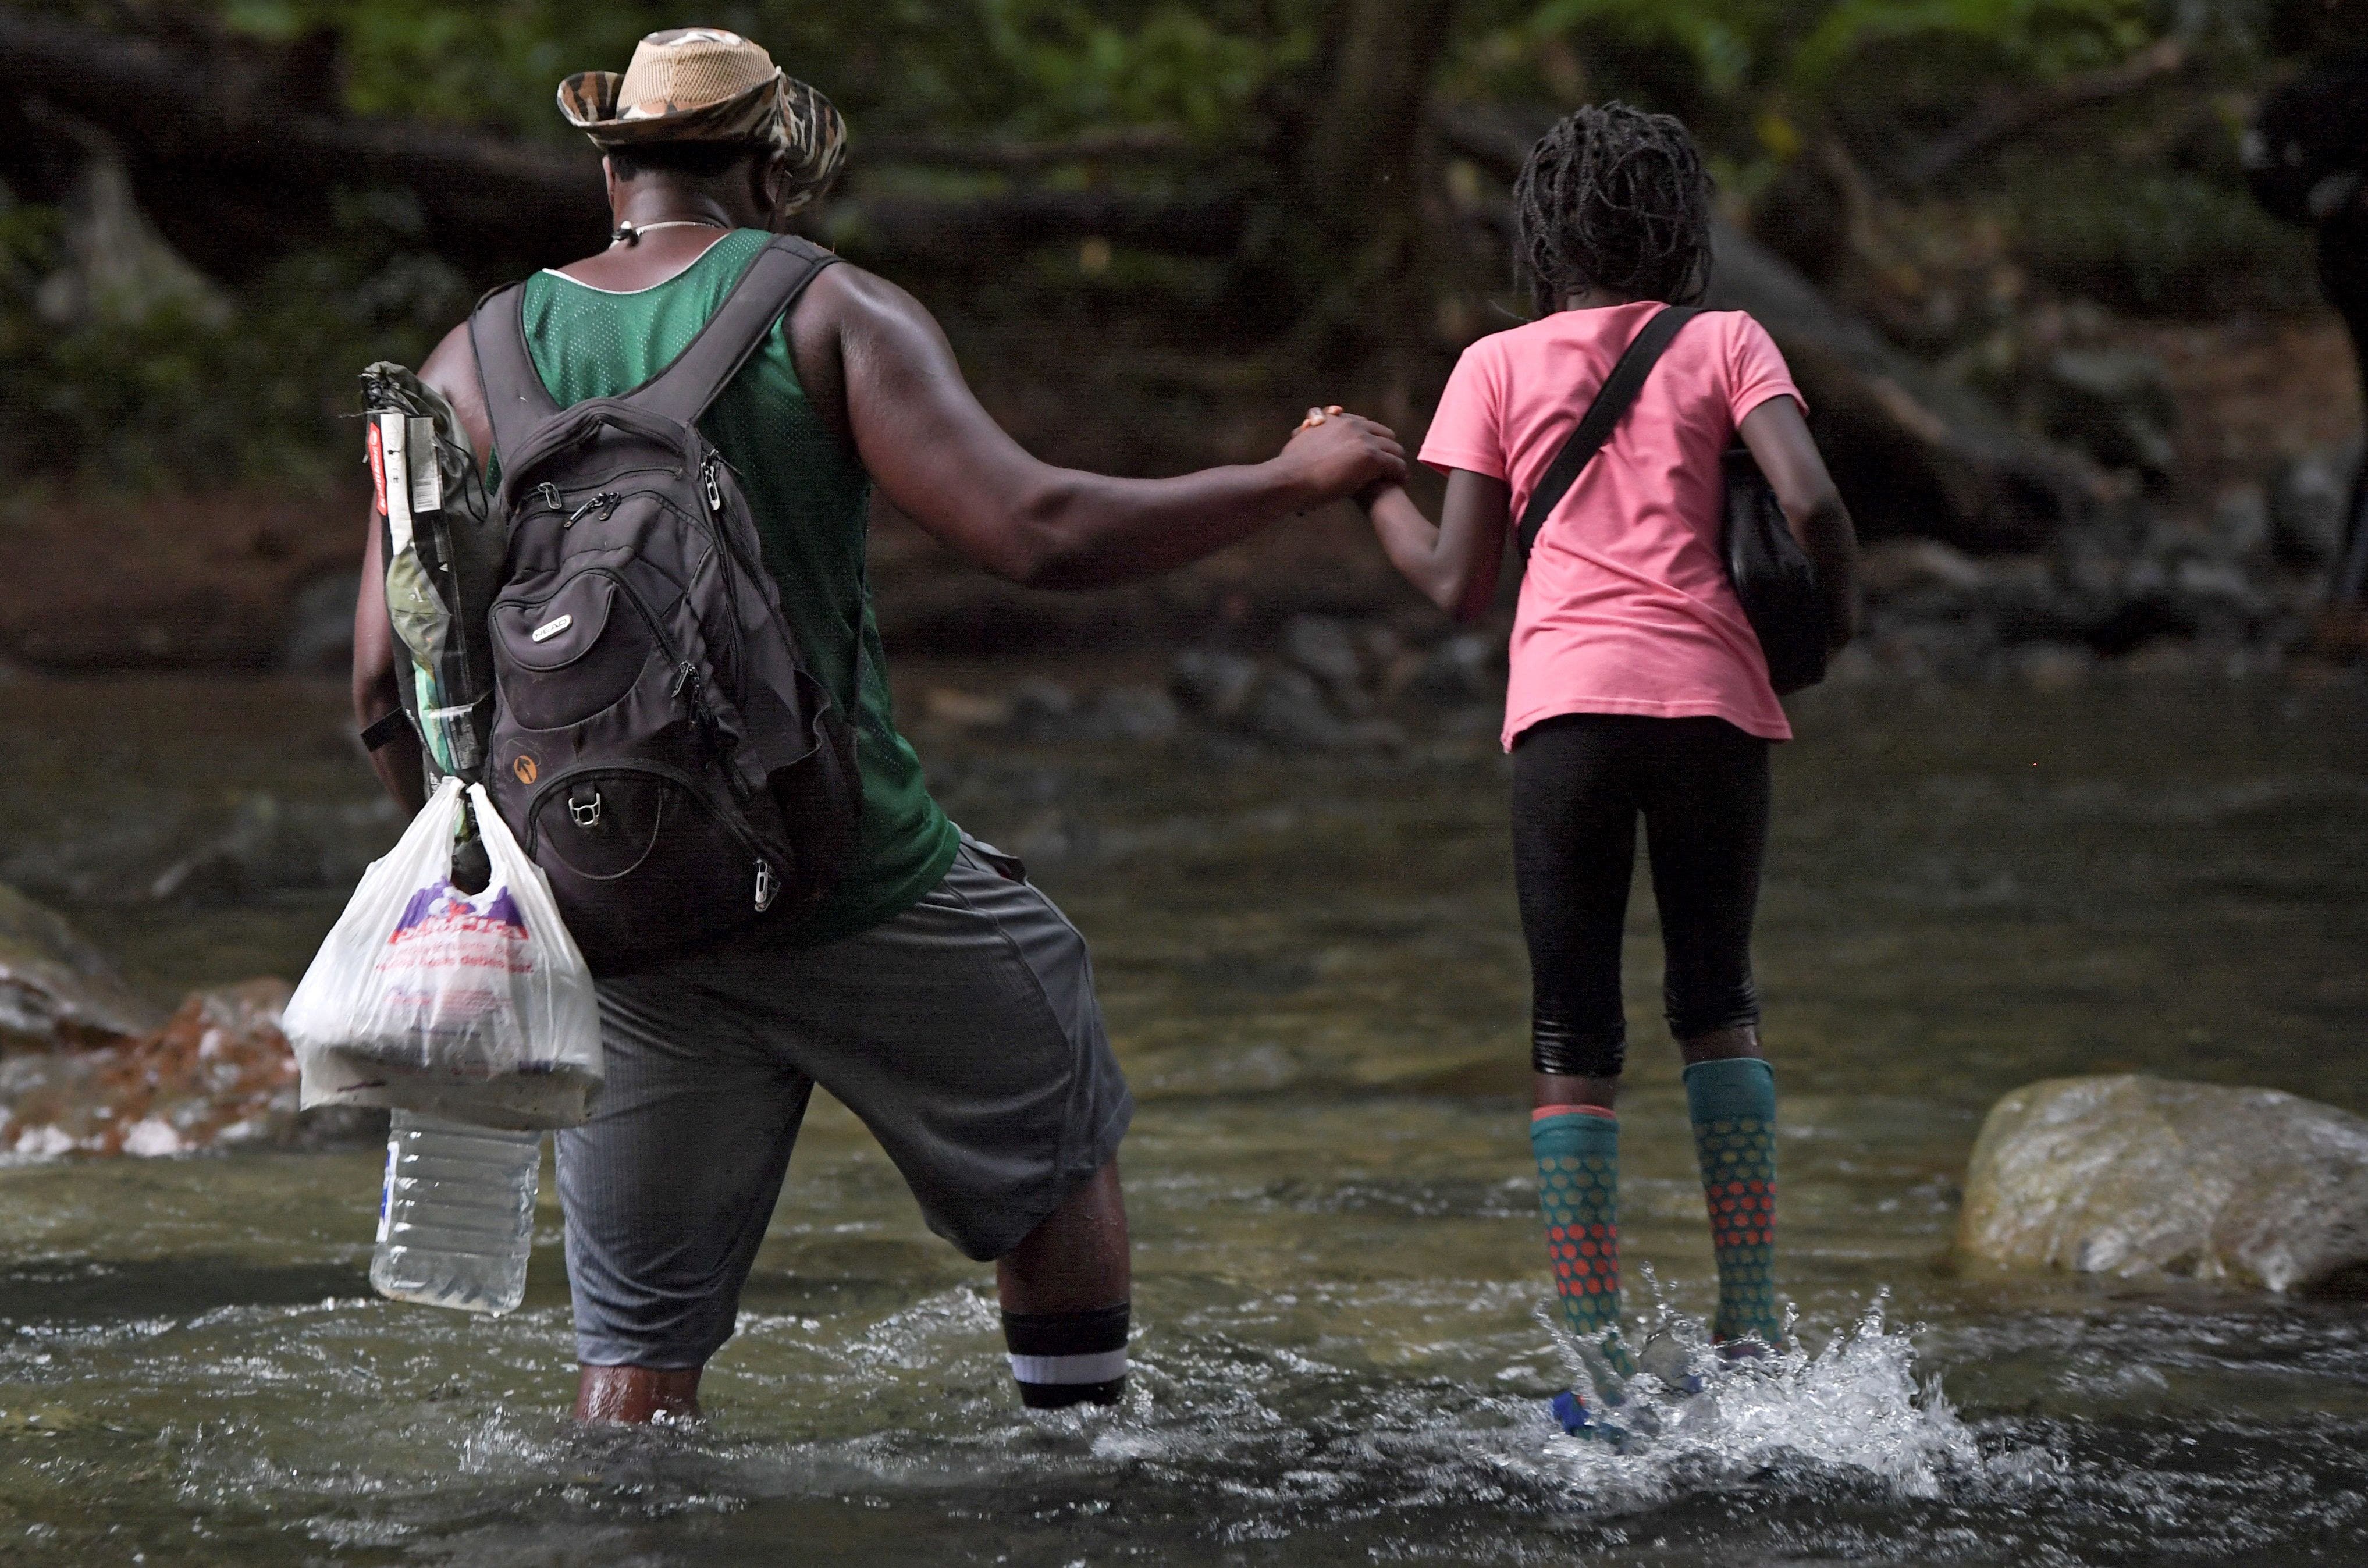 A Haitian migrant man holds a girl's hand as they cross the jungle of the Darien Gap, near Acandi, Choco department, Colombia, heading to Panama, on September 26, 2021, on their way trying to reach the U.S.